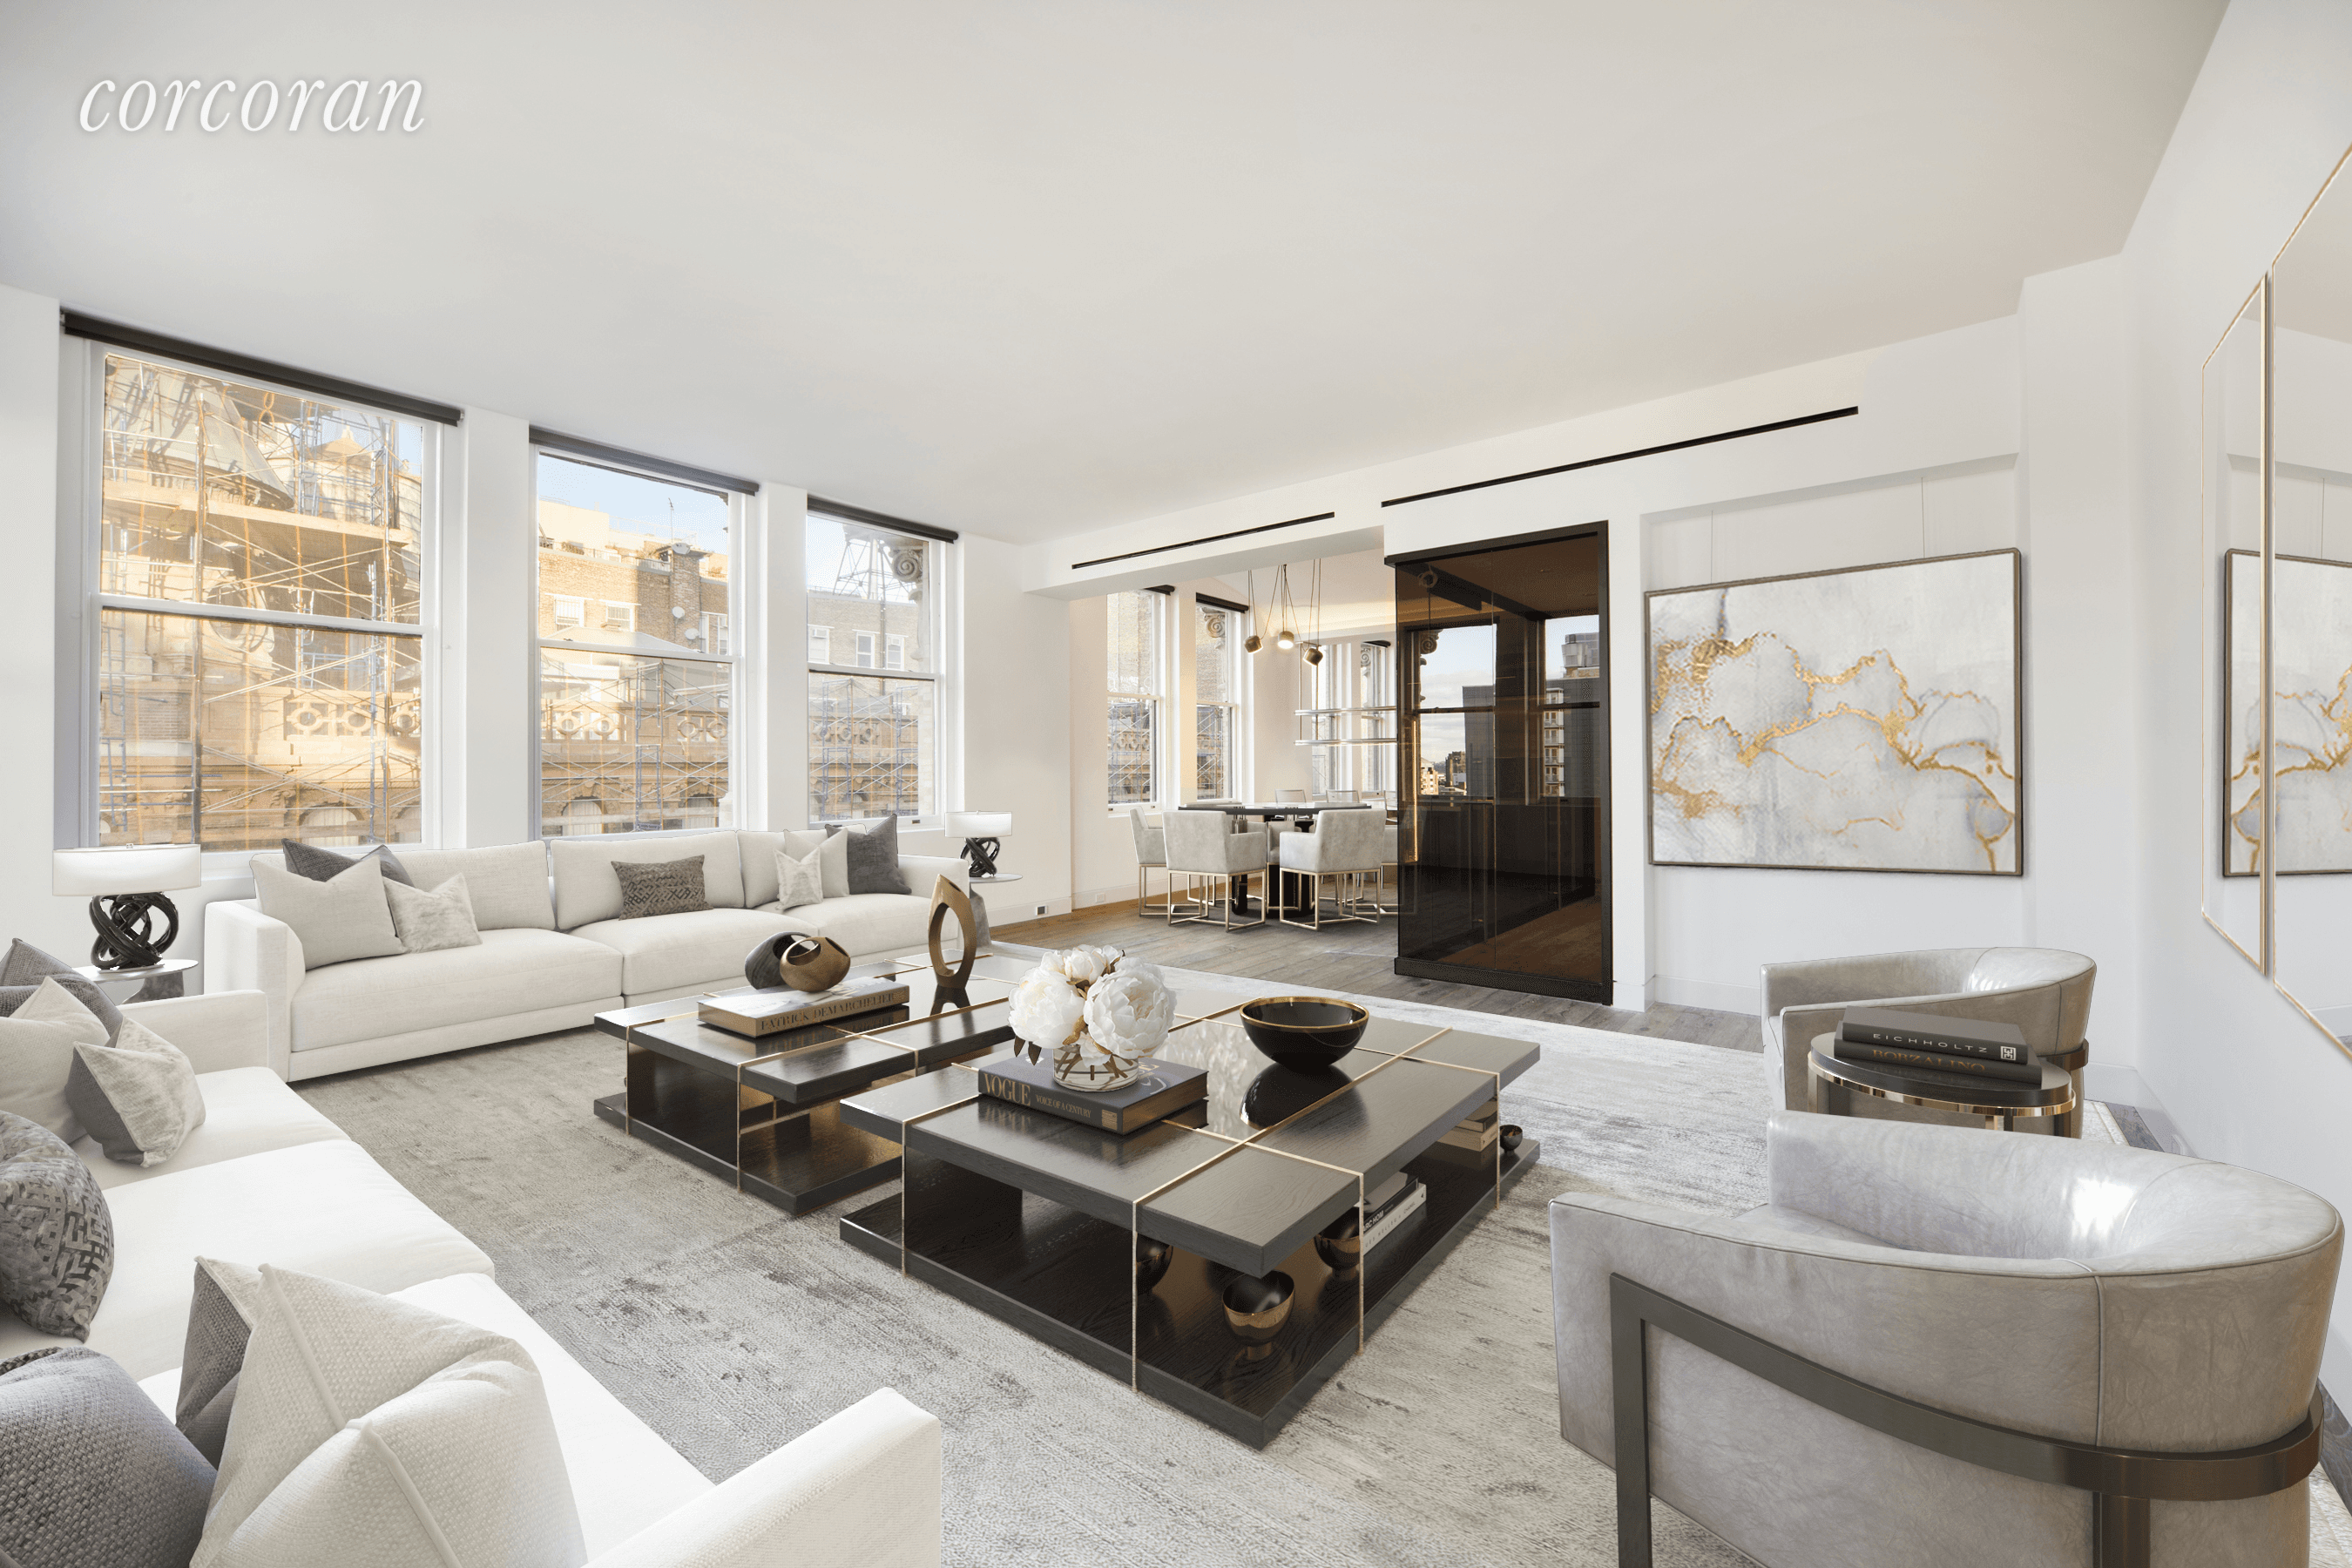 This gorgeous, chic, and newly renovated 2, 300 sq ft, three bedroom, three bathroom eco smart loft penthouse redefines luxurious living within one of the most historic buildings in NoHo.